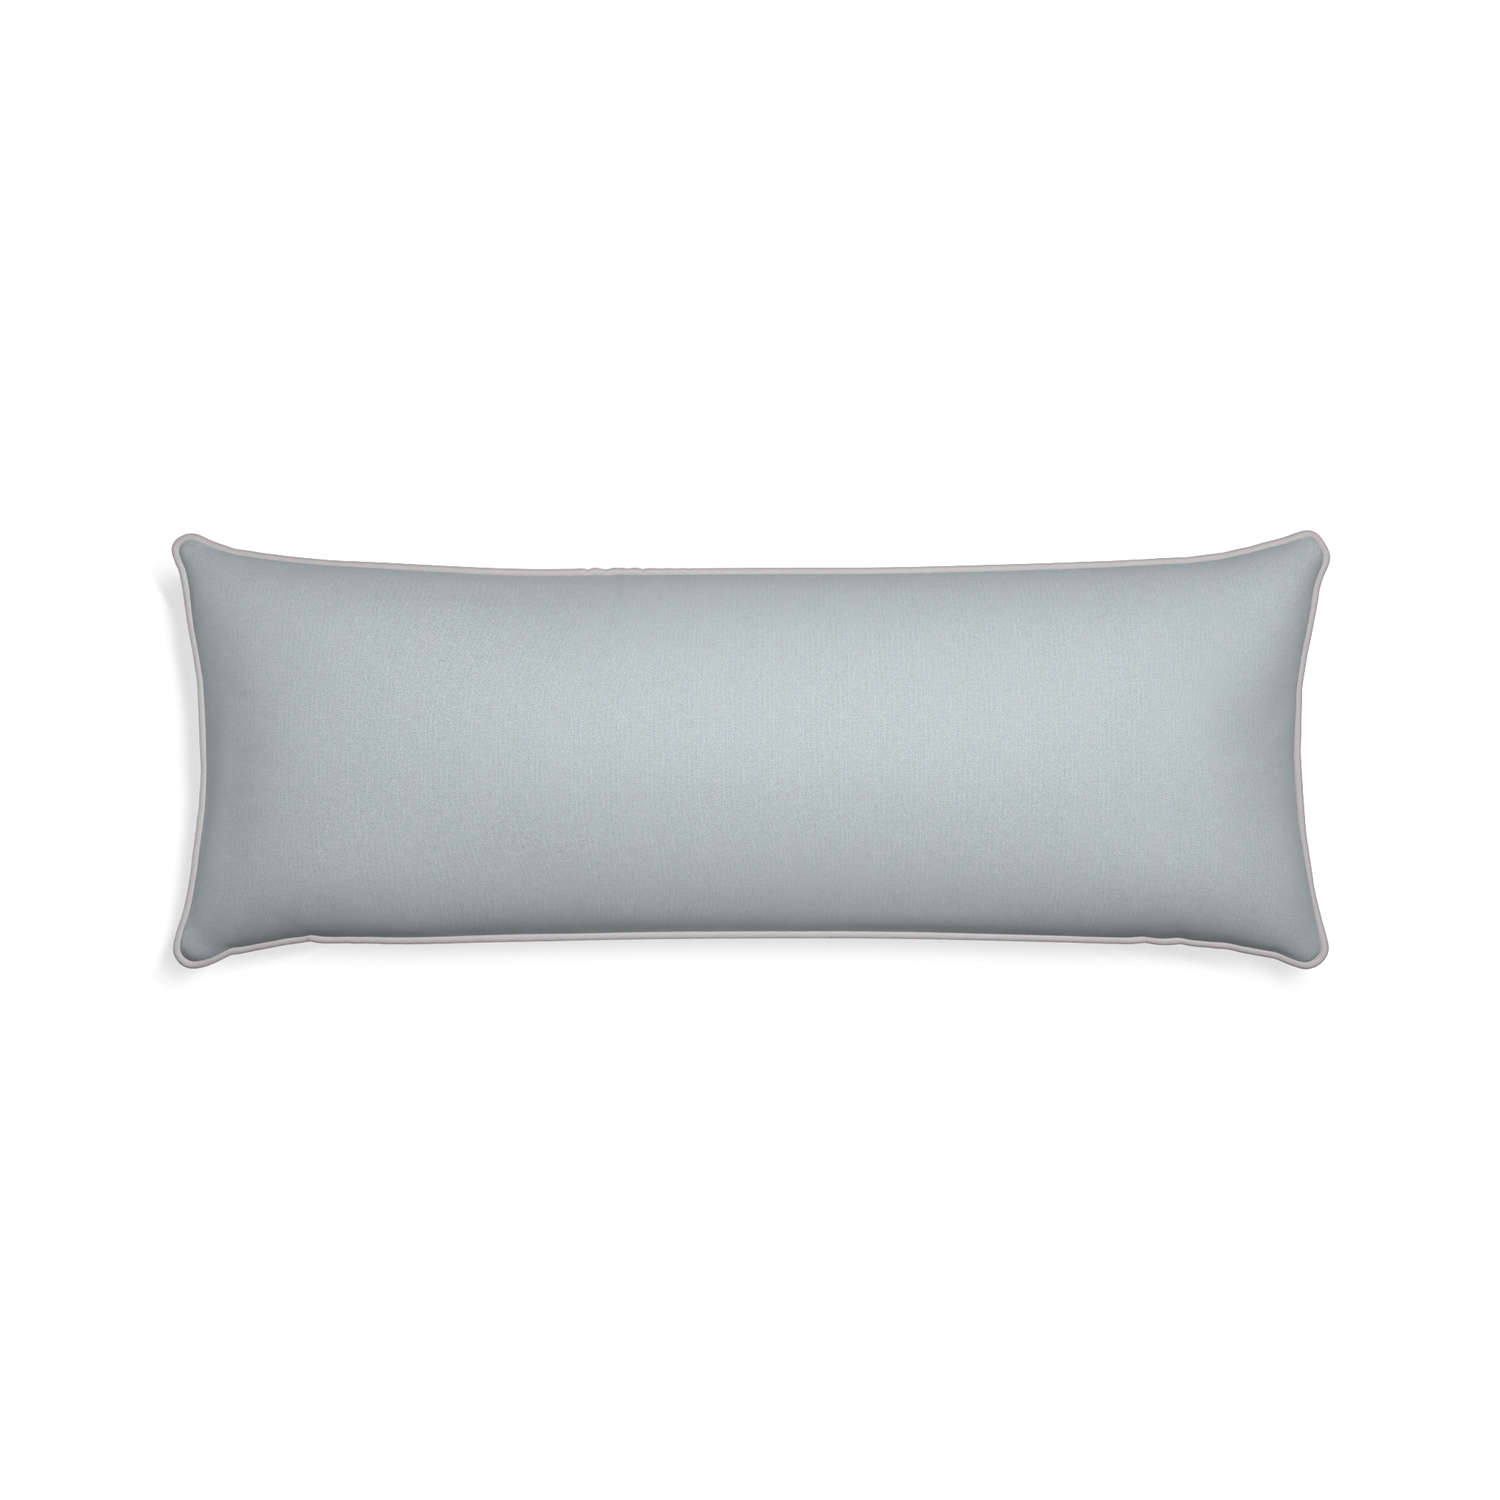 Xl-lumbar sea custom grey bluepillow with pebble piping on white background